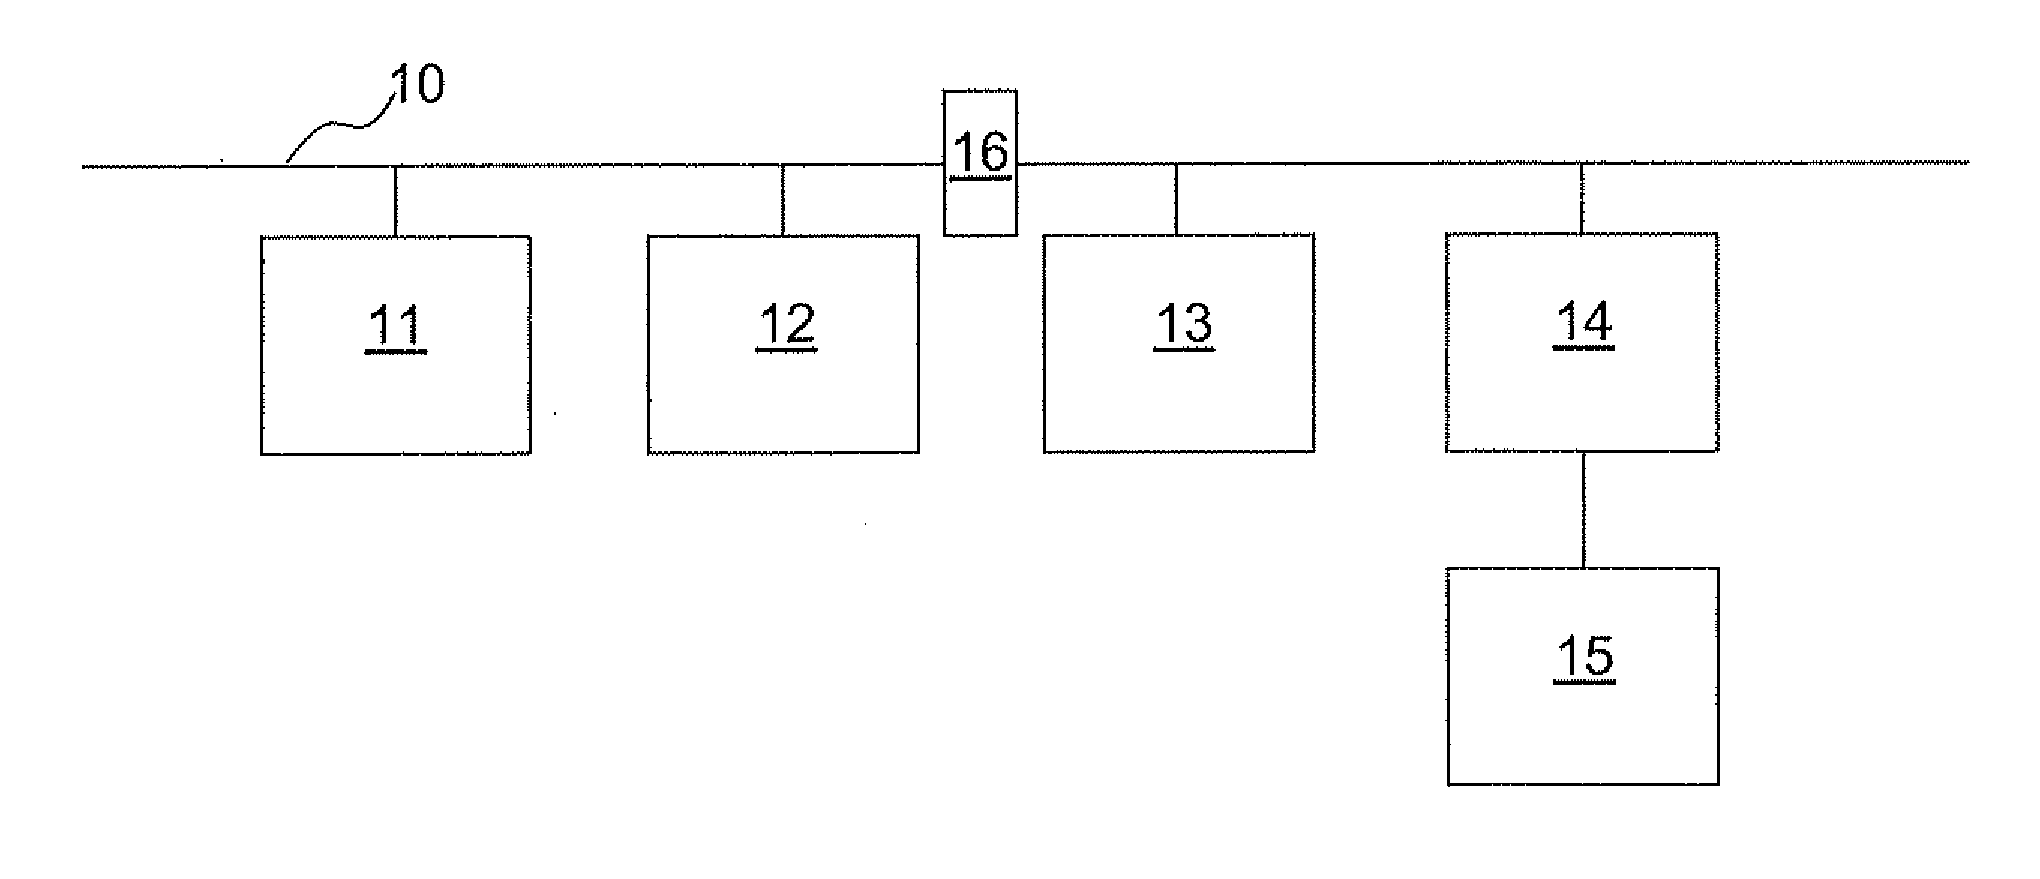 Microcontroller having a computing unit and a logic circuit, and method for carrying out computations by a microcontroller for a regulation or a control in a vehicle